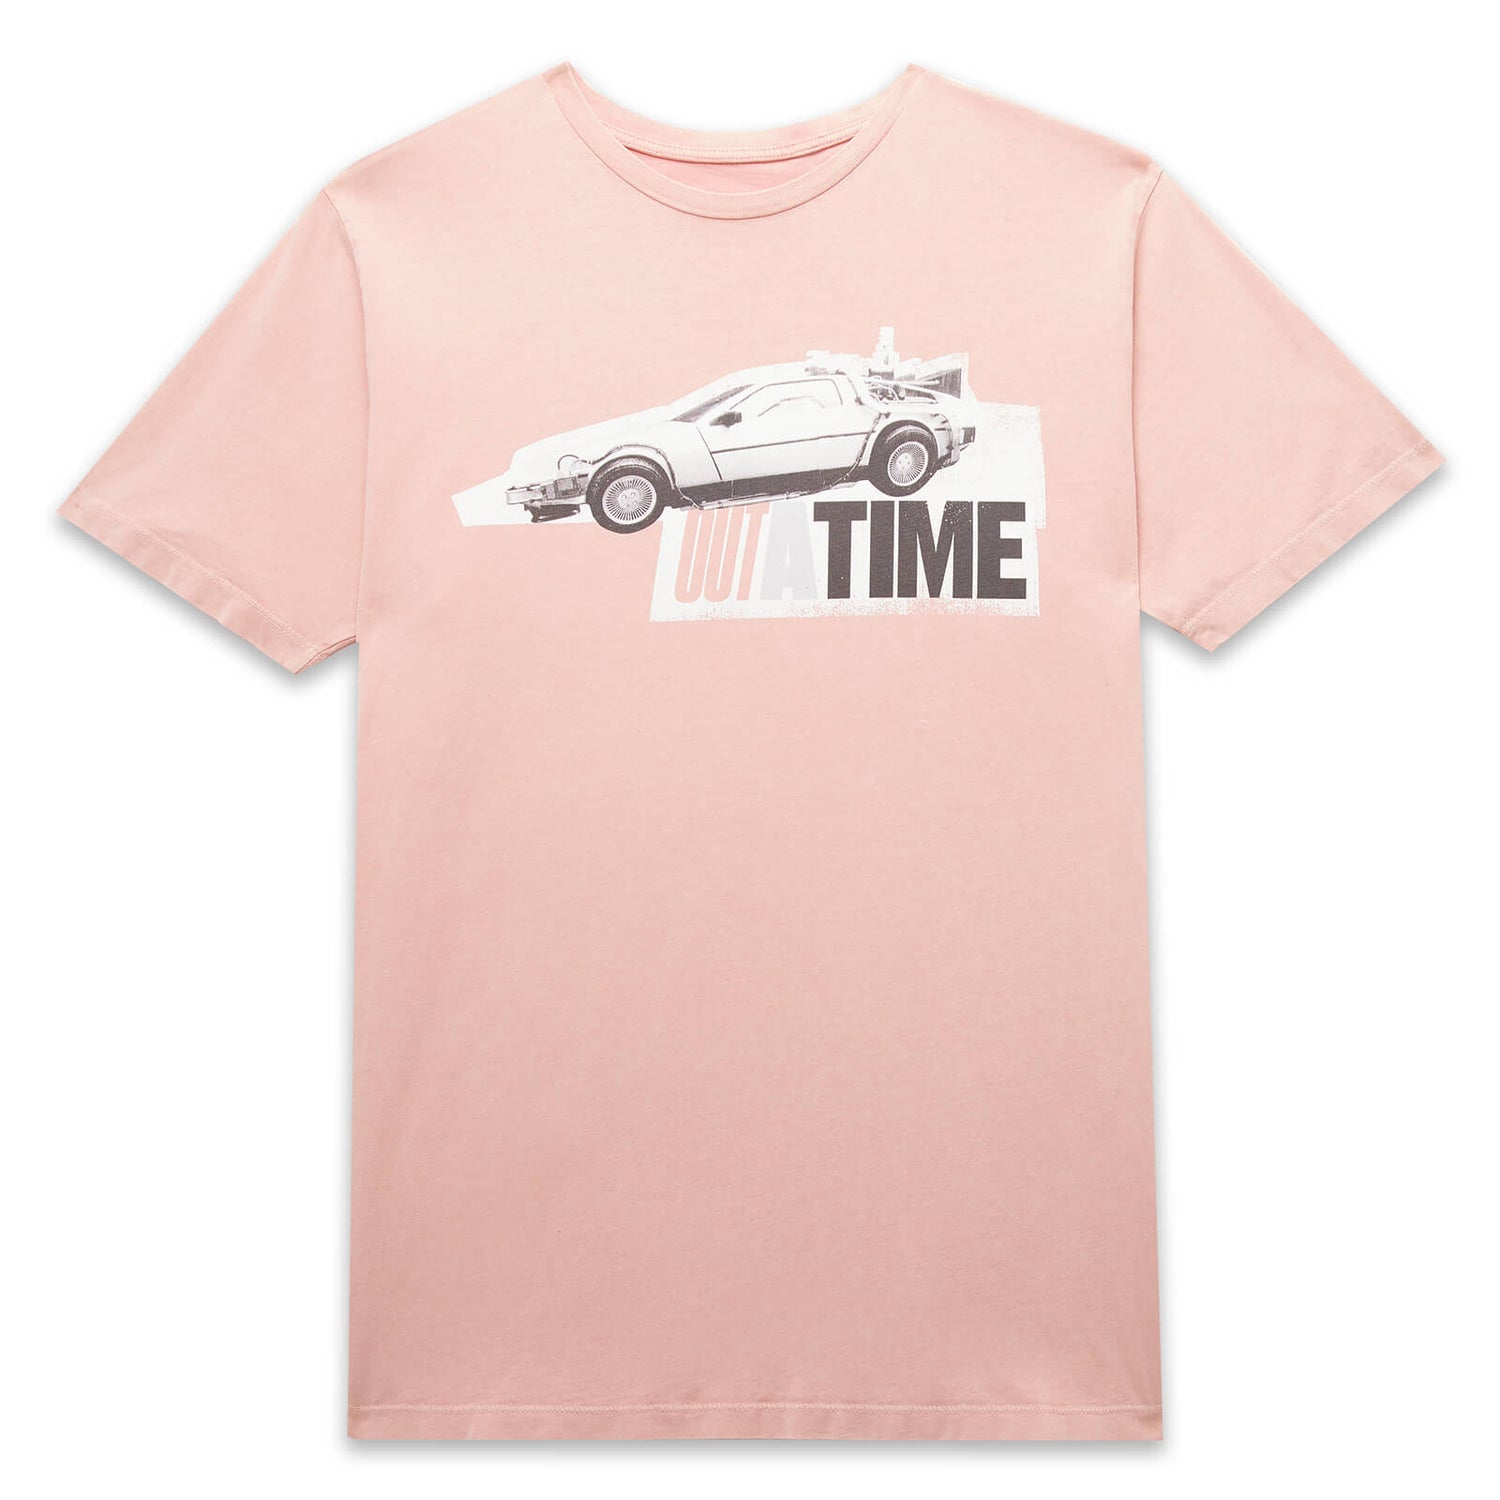 Back to the Future Outatime Unisex T-Shirt - Pink Acid Wash